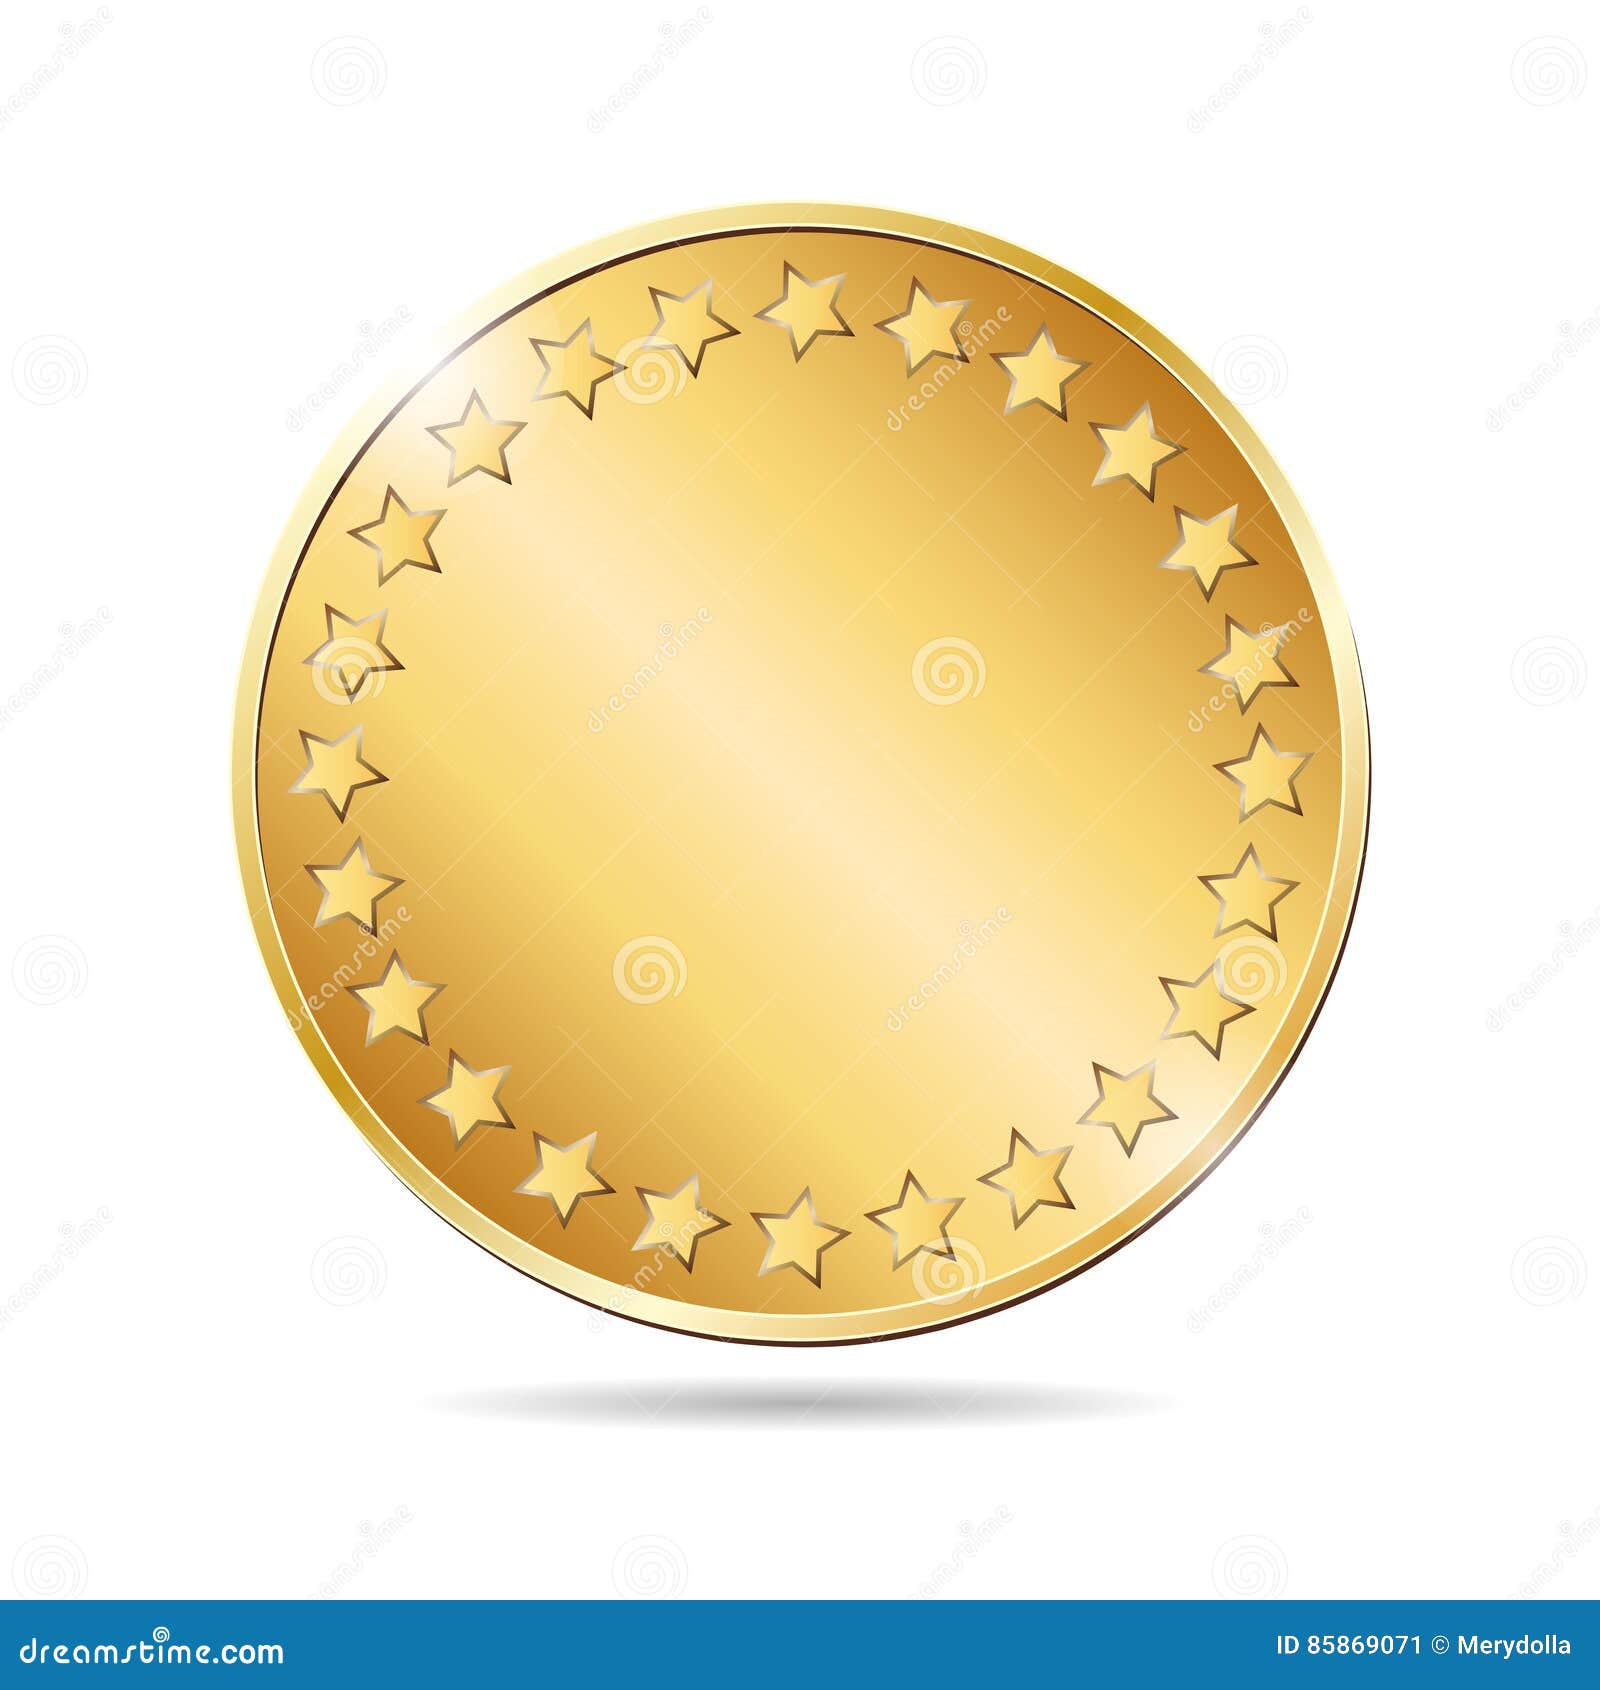 Illustration of a Blank Golden Coin on White Background Stock ...